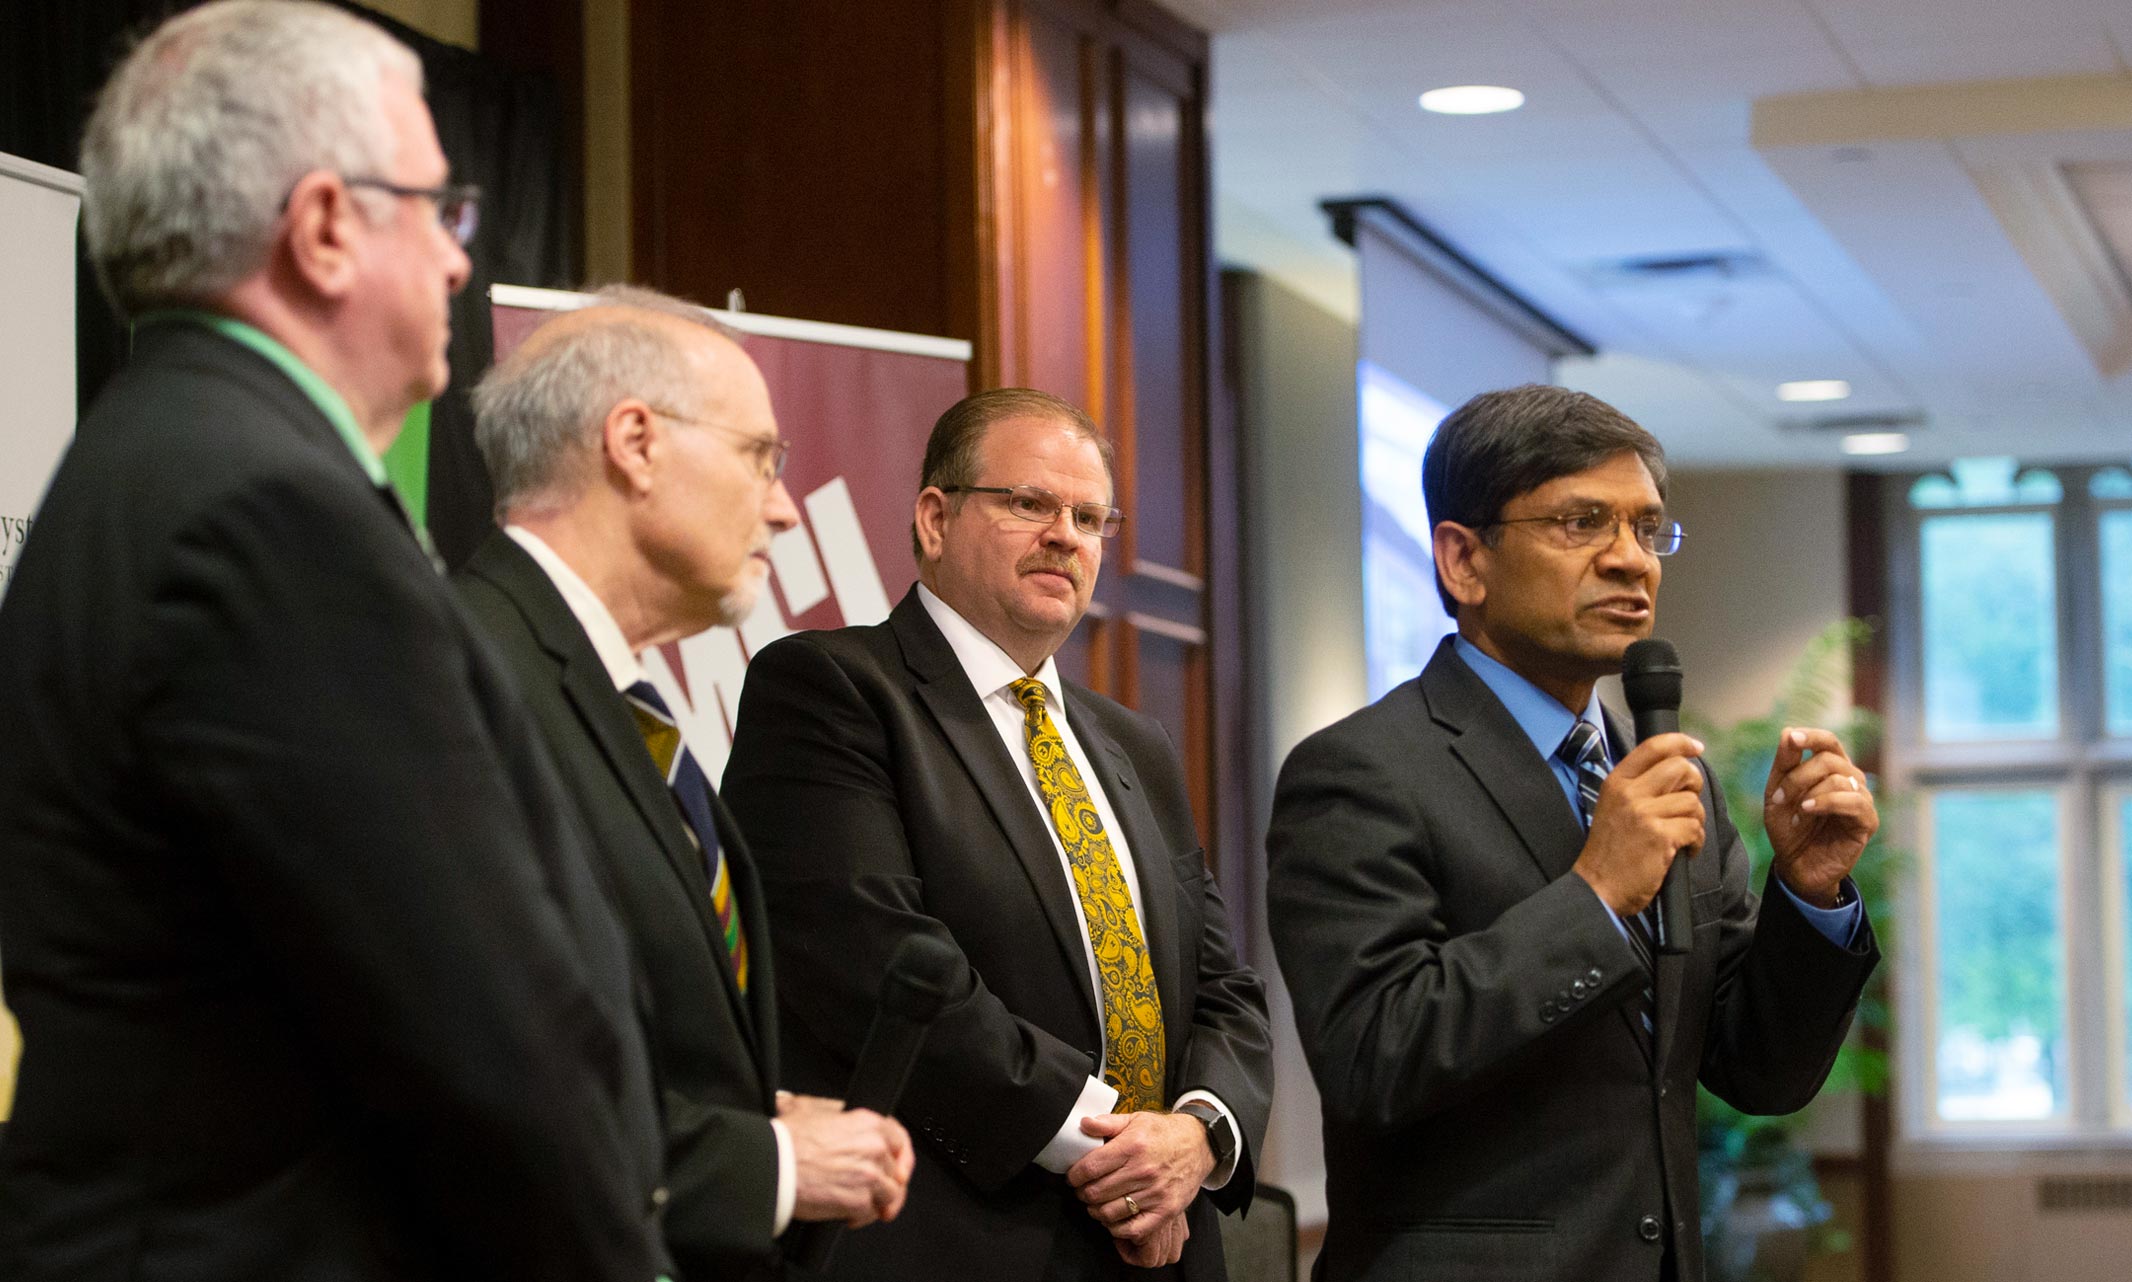 UMKC Chancellor Mauli Agrawal, pictured on the right, addresses the crowd at the Precision Medicine announcement event